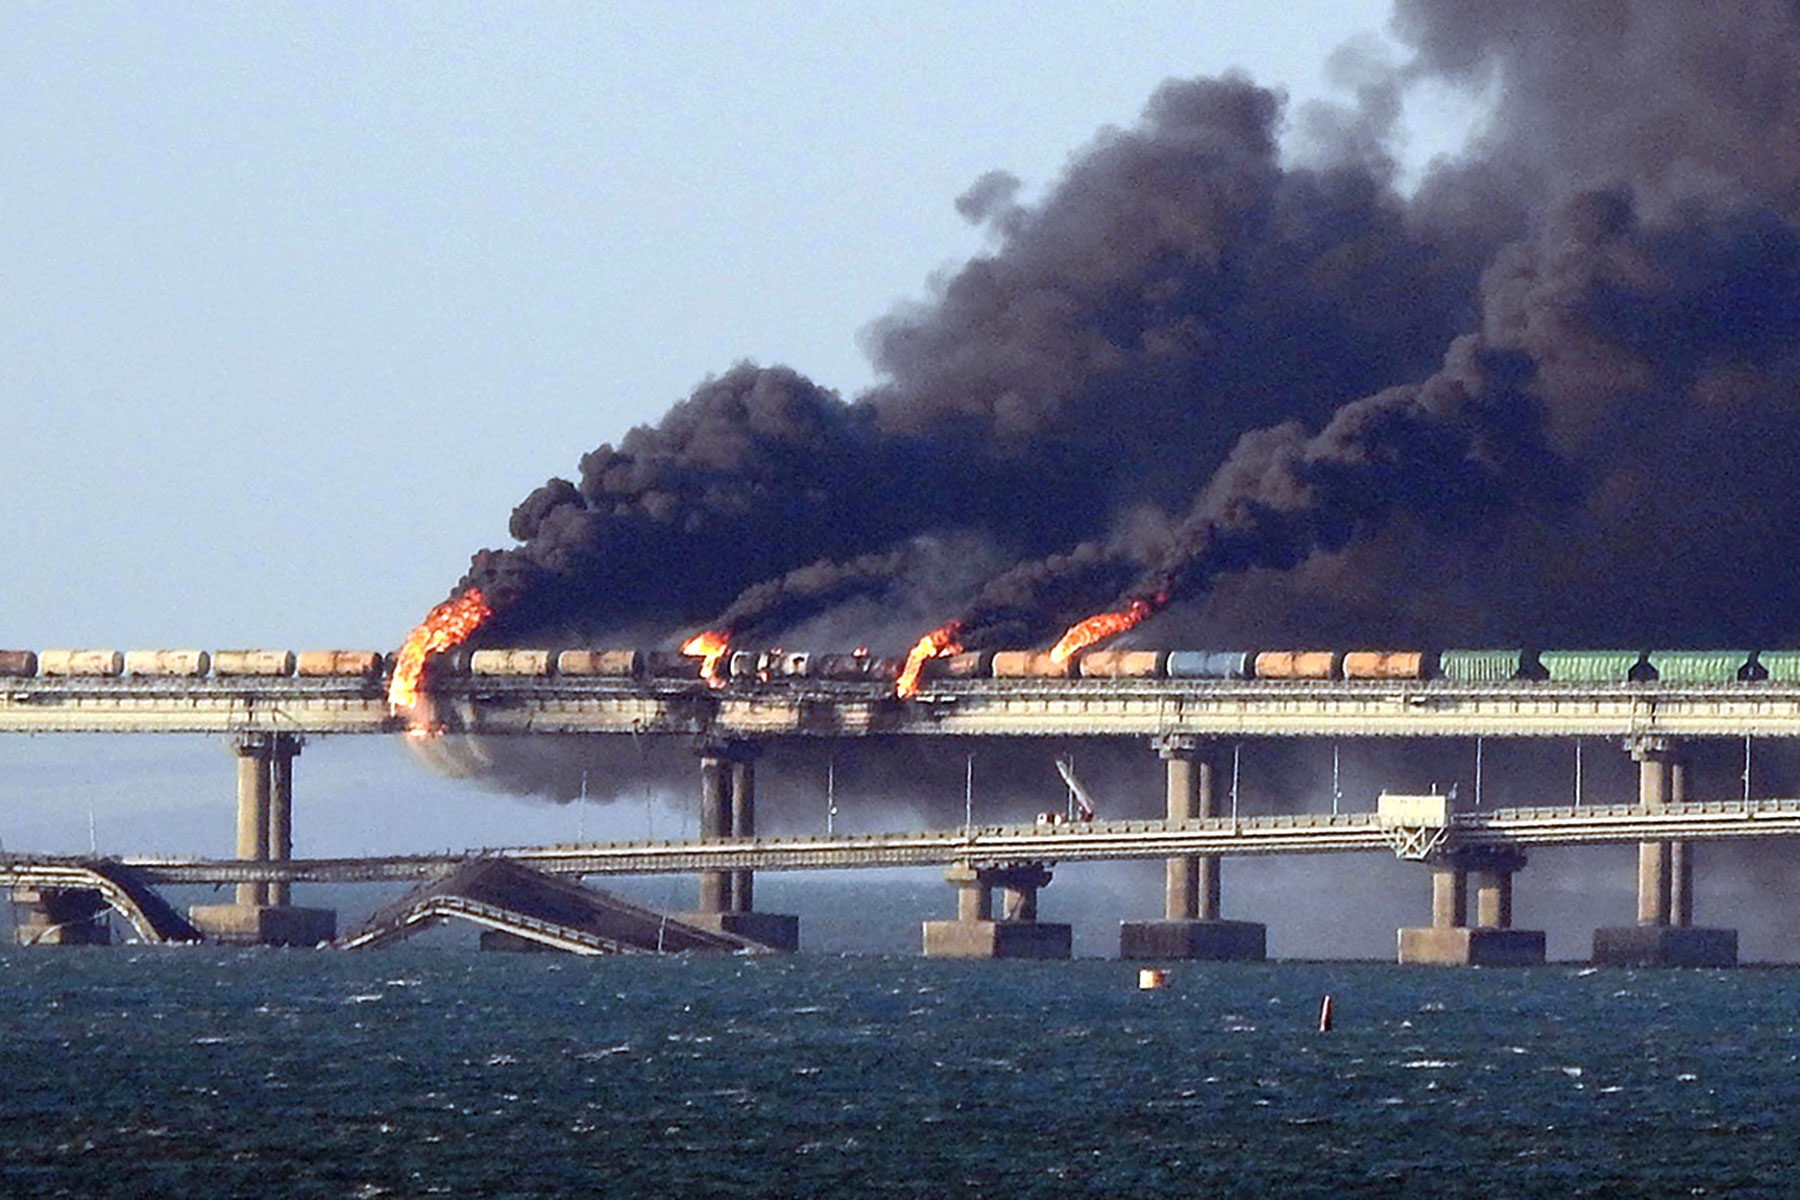 Putin is likely to take Kerch bridge blast as a personal affront and respond viciously